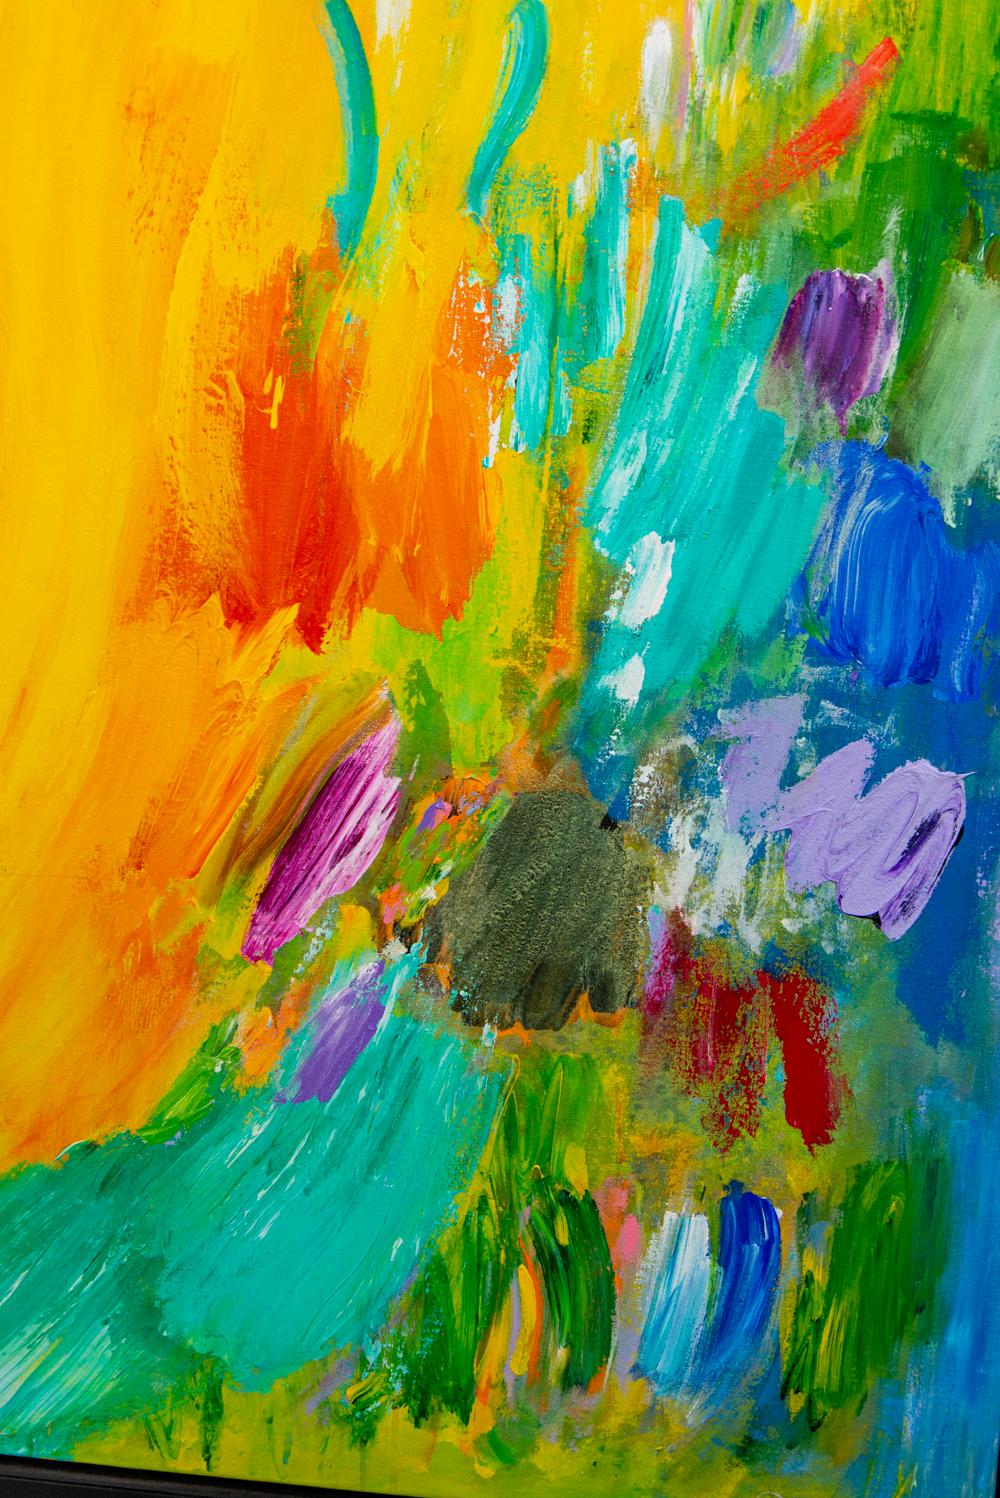 Tropic Noon - large, bright, colorful, abstract expressionist, acrylic on canvas - Abstract Expressionist Painting by Paul Fournier